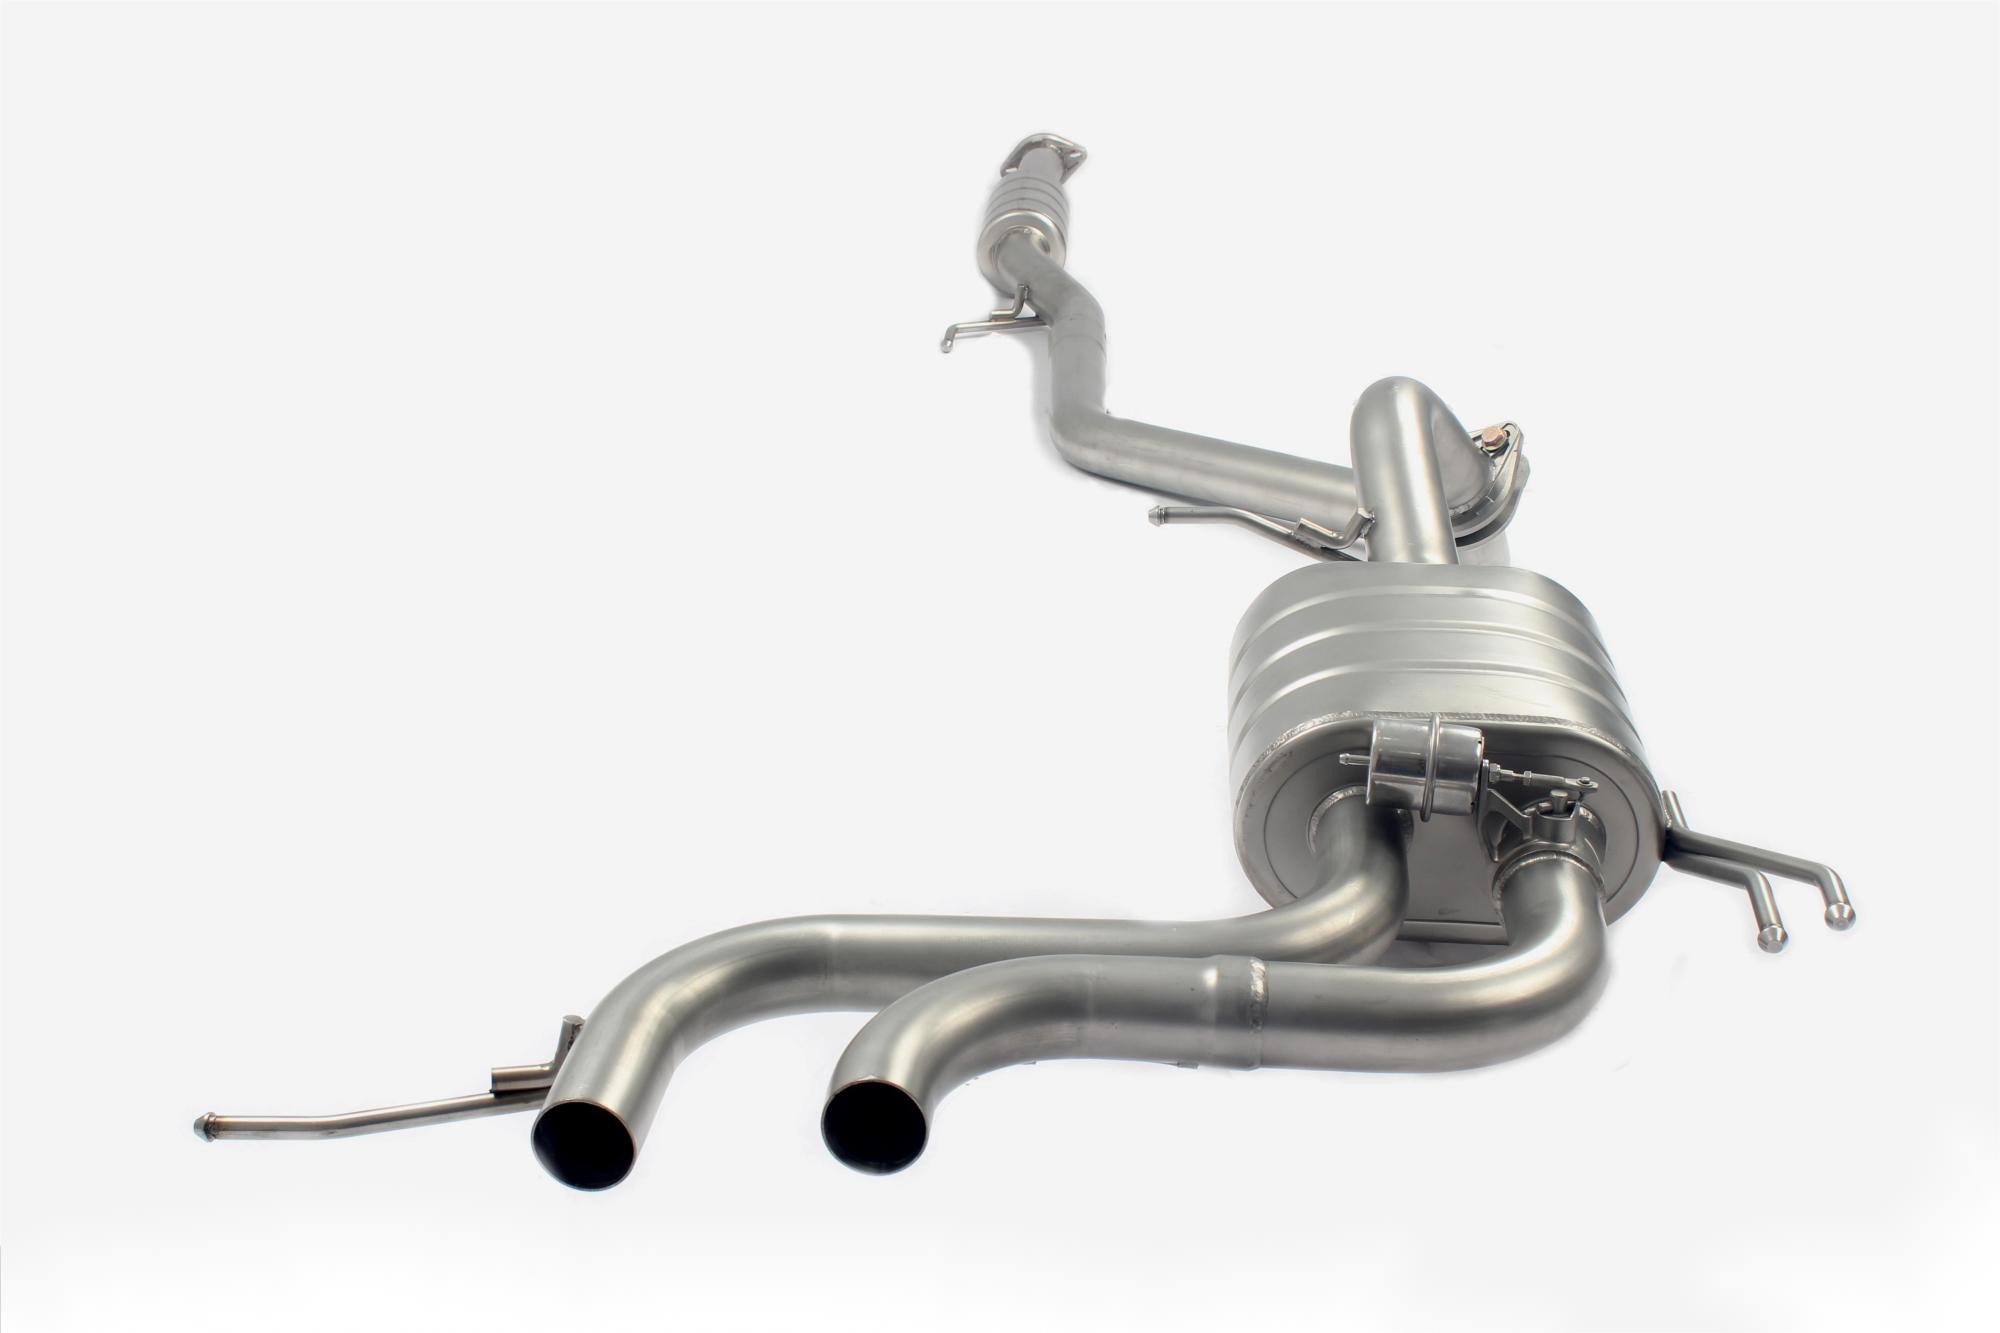 Hyundai Veloster stainless steel exhaust system